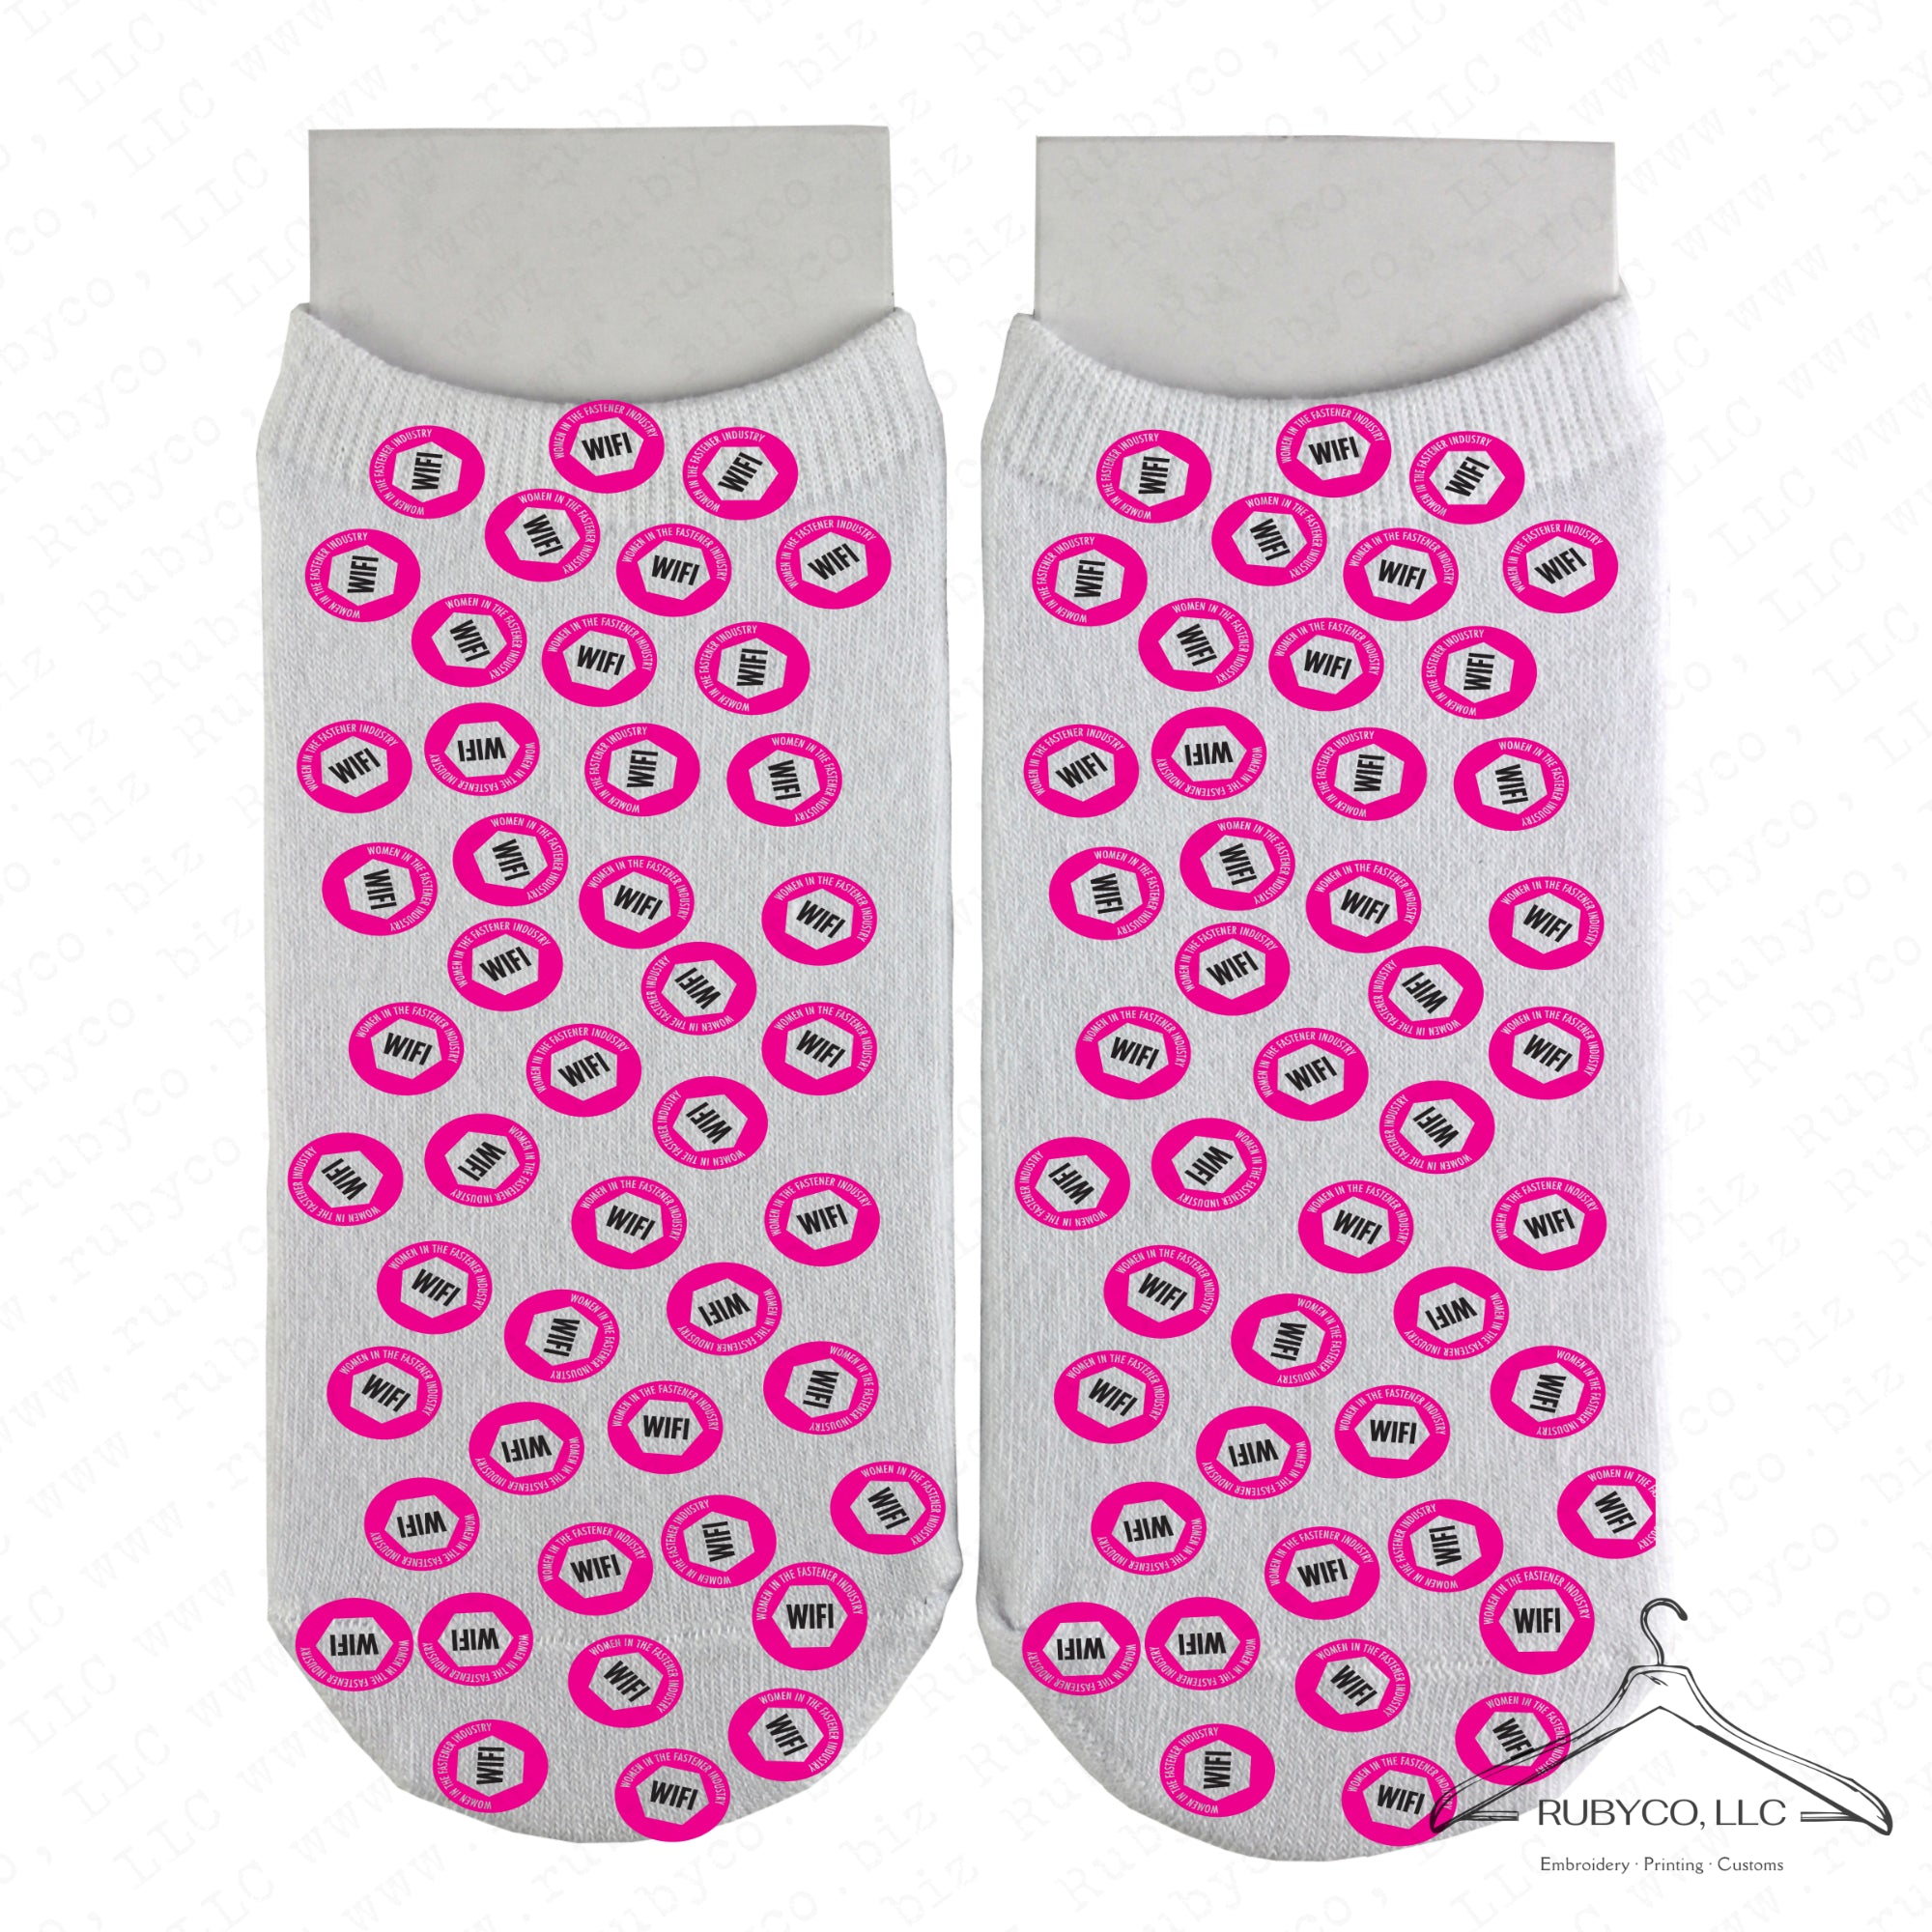 WIFI Logo - Adult No-Show Socks - Made Exclusively for Women in the Fastener Industry Association